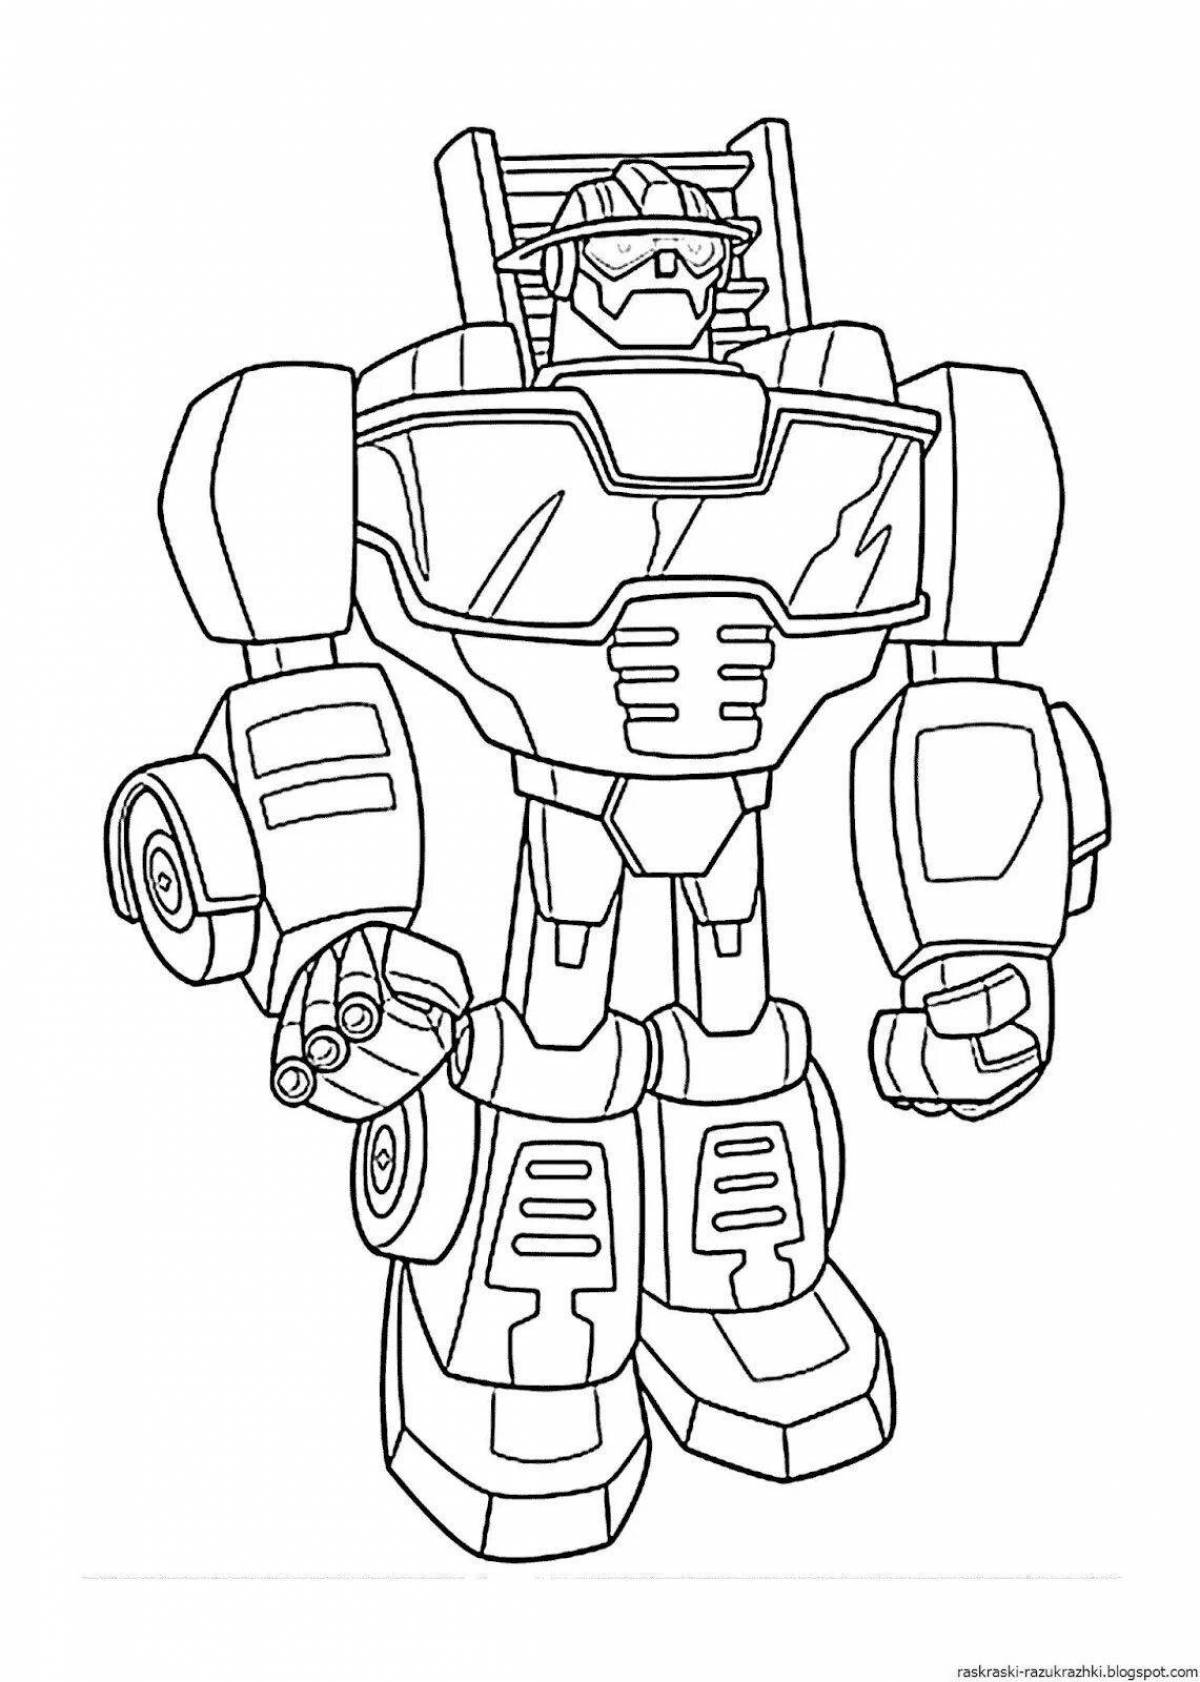 Colorful robot tobot coloring book